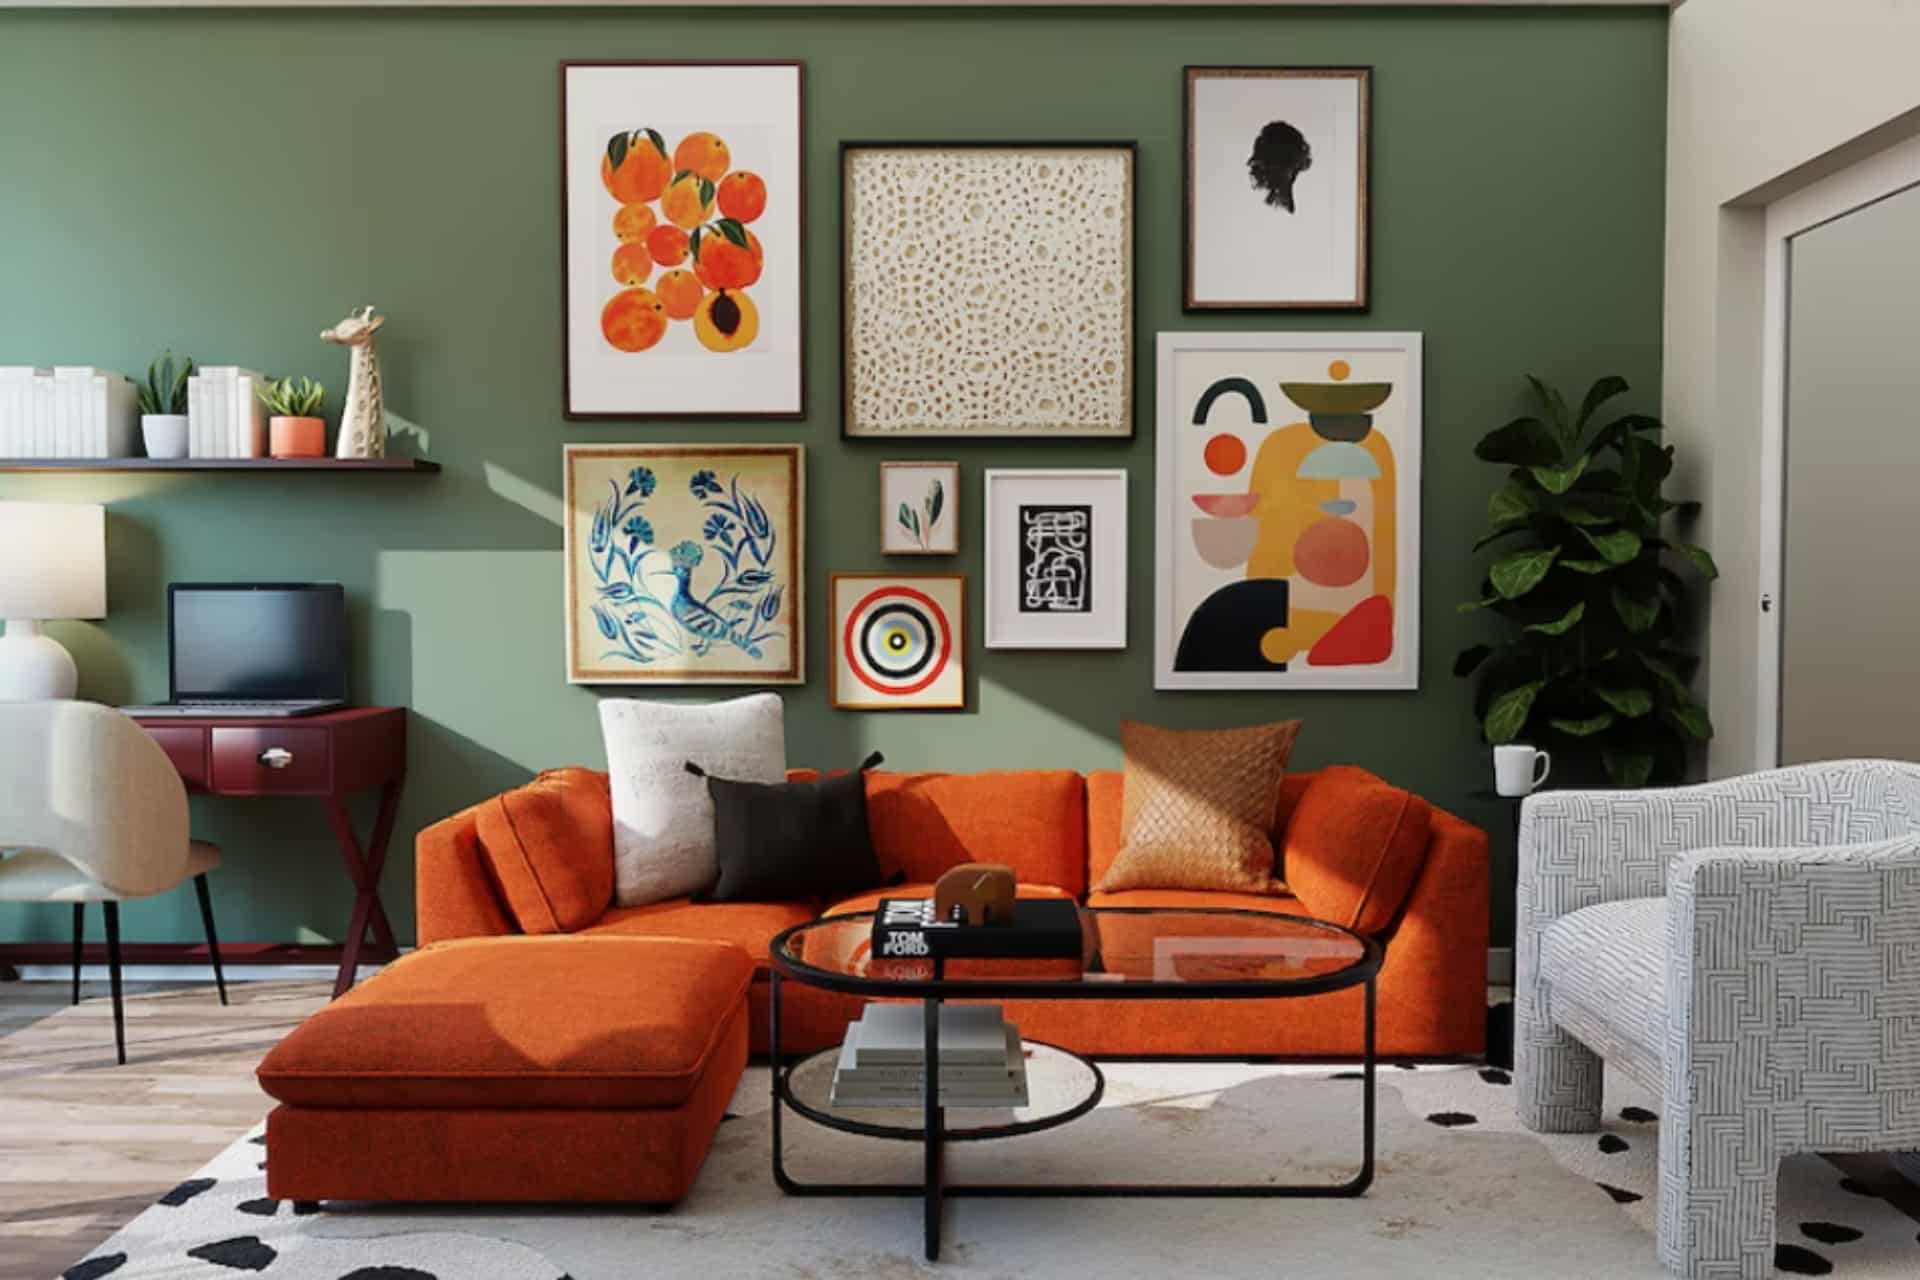 How to Pick an Accent Wall